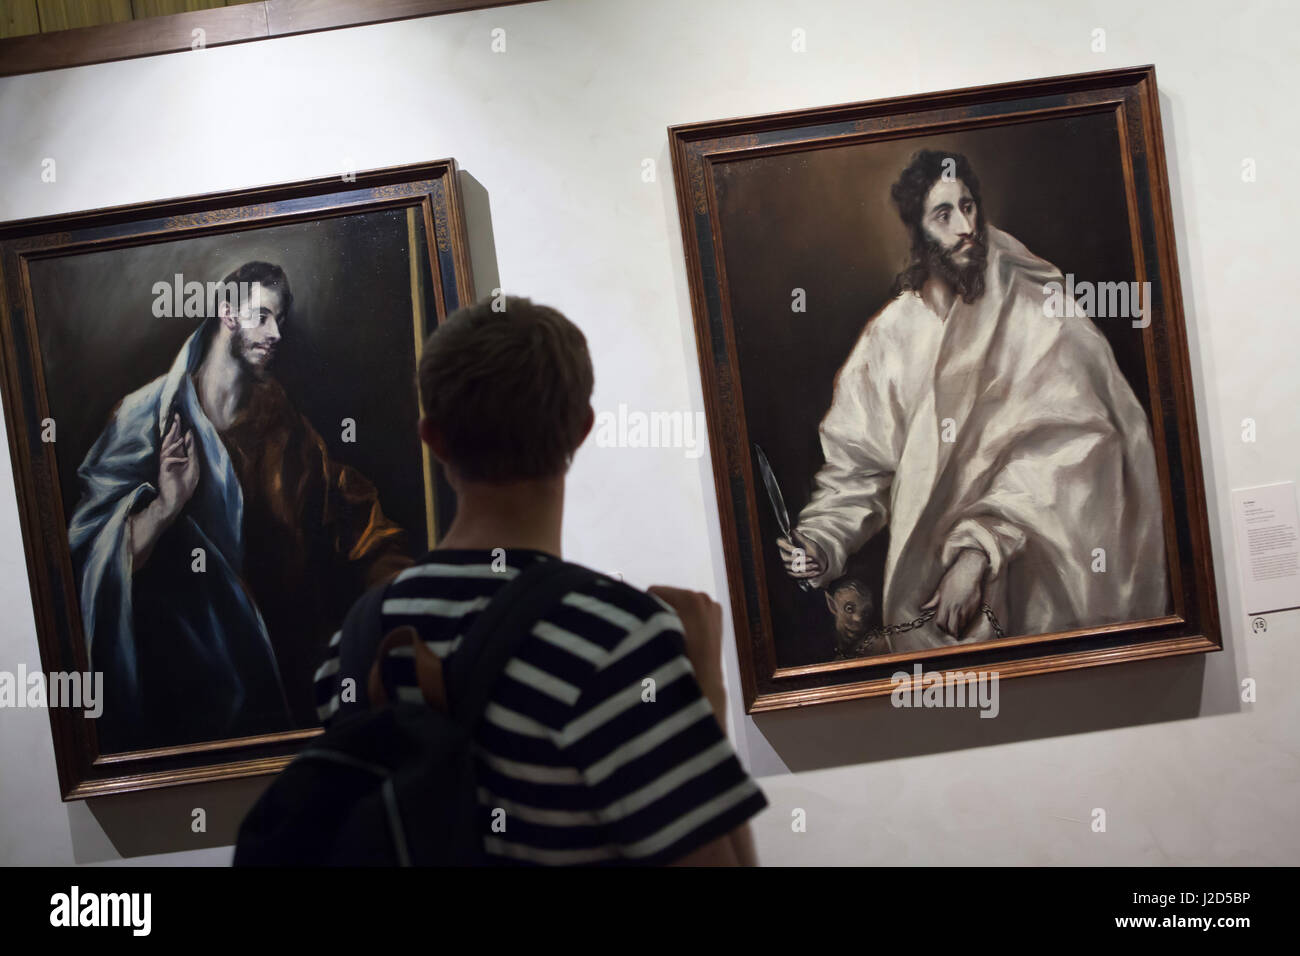 Visitor in front of the paintings of Saint Thomas the Apostle (L) and Saint Bartholomew the Apostle (R) from the Apostolados (1610-1614) by Spanish mannerist painter El Greco displayed in the El Greco Museum in Toledo, Spain. Stock Photo